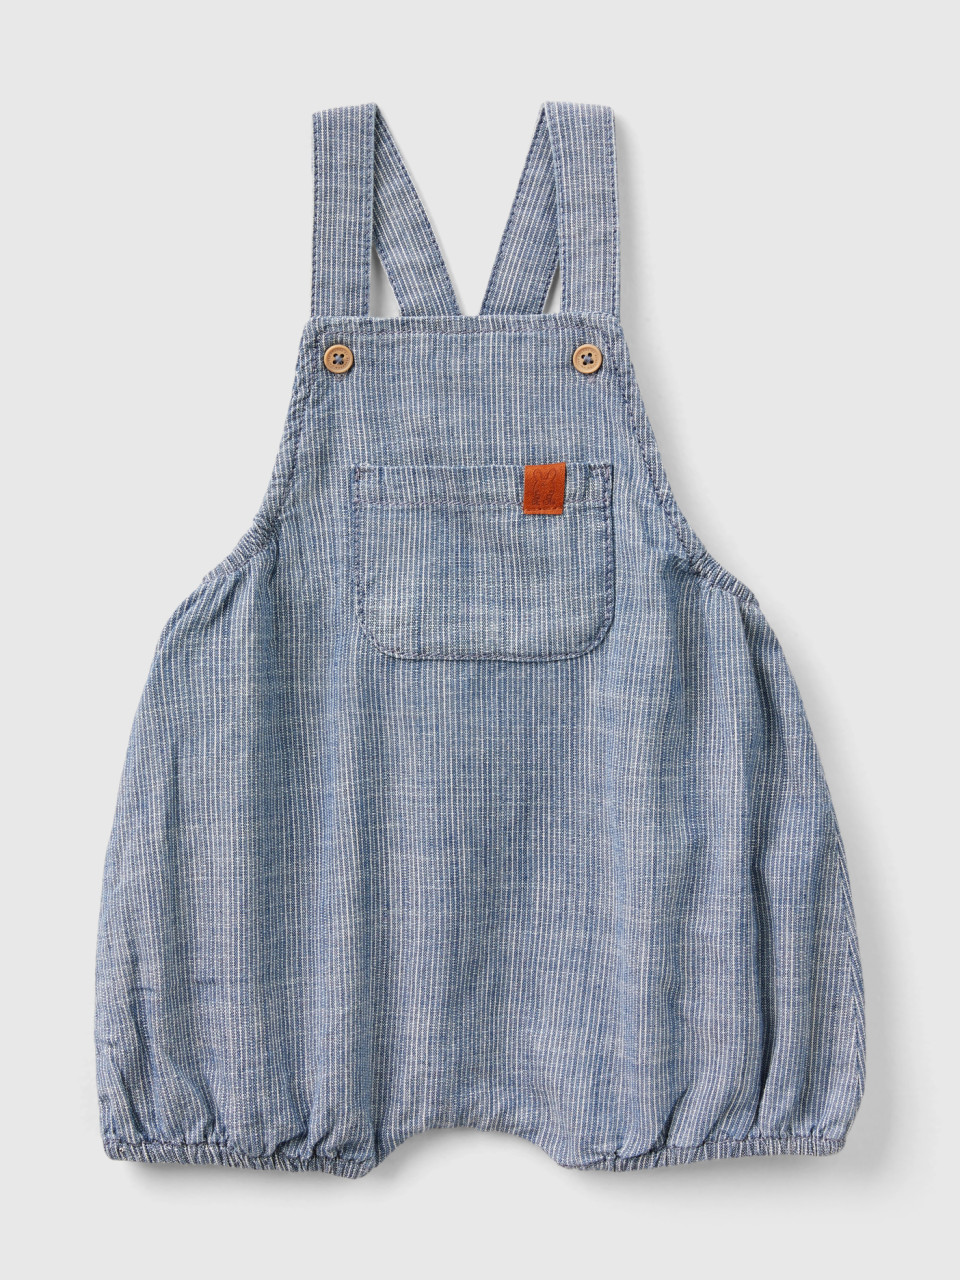 Benetton, Striped Chambray Dungarees, Blue, Kids